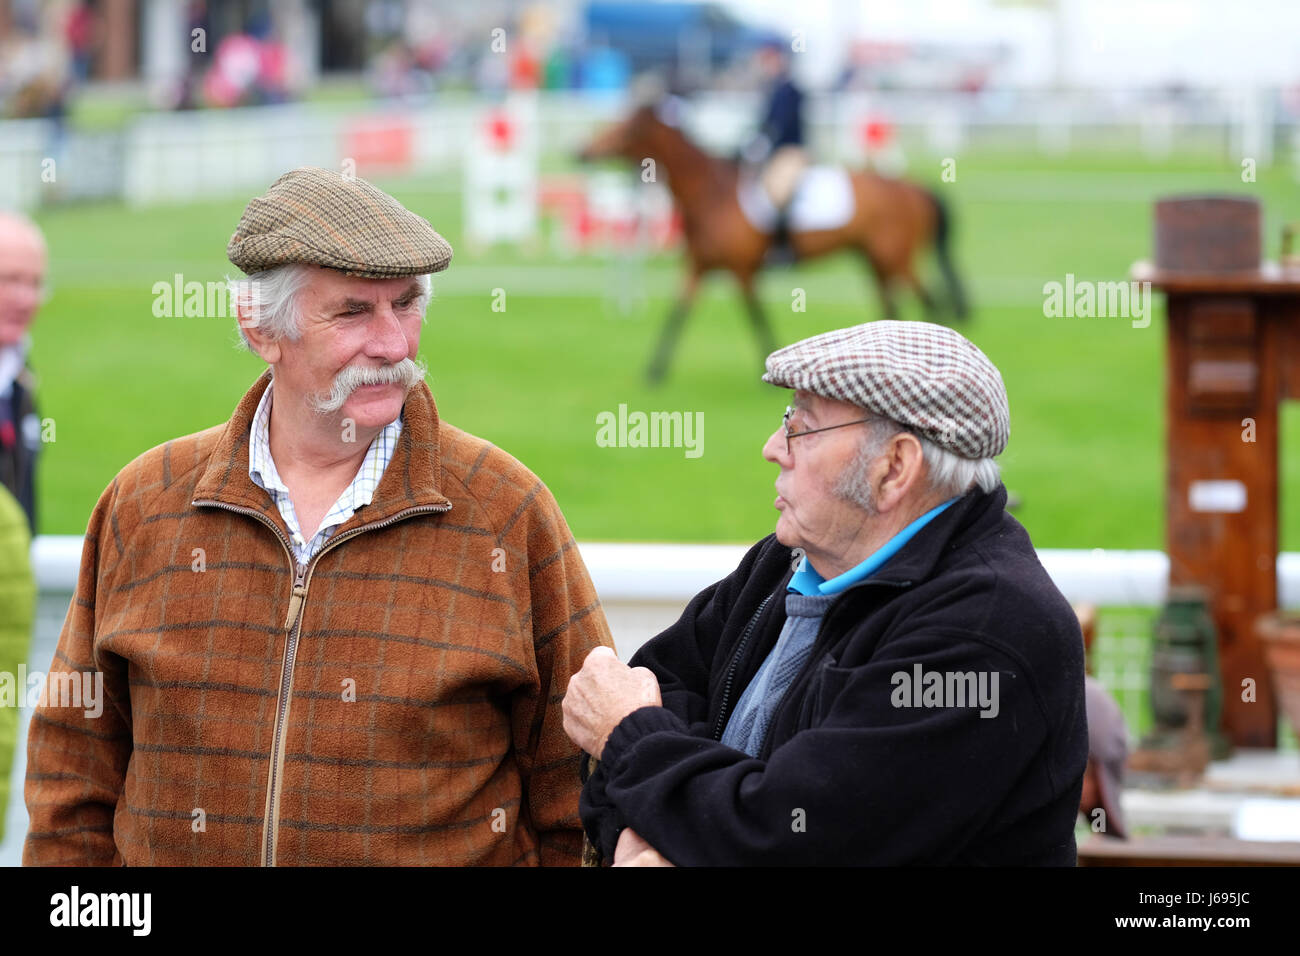 Royal Welsh Spring Festival, Builth Wells, Powys, Wales - May 2017 - Two farmers enjoy the chance to chat at the show jumping arena - the Royal Welsh Spring Festival. Credit: Steven May/Alamy Live News Stock Photo